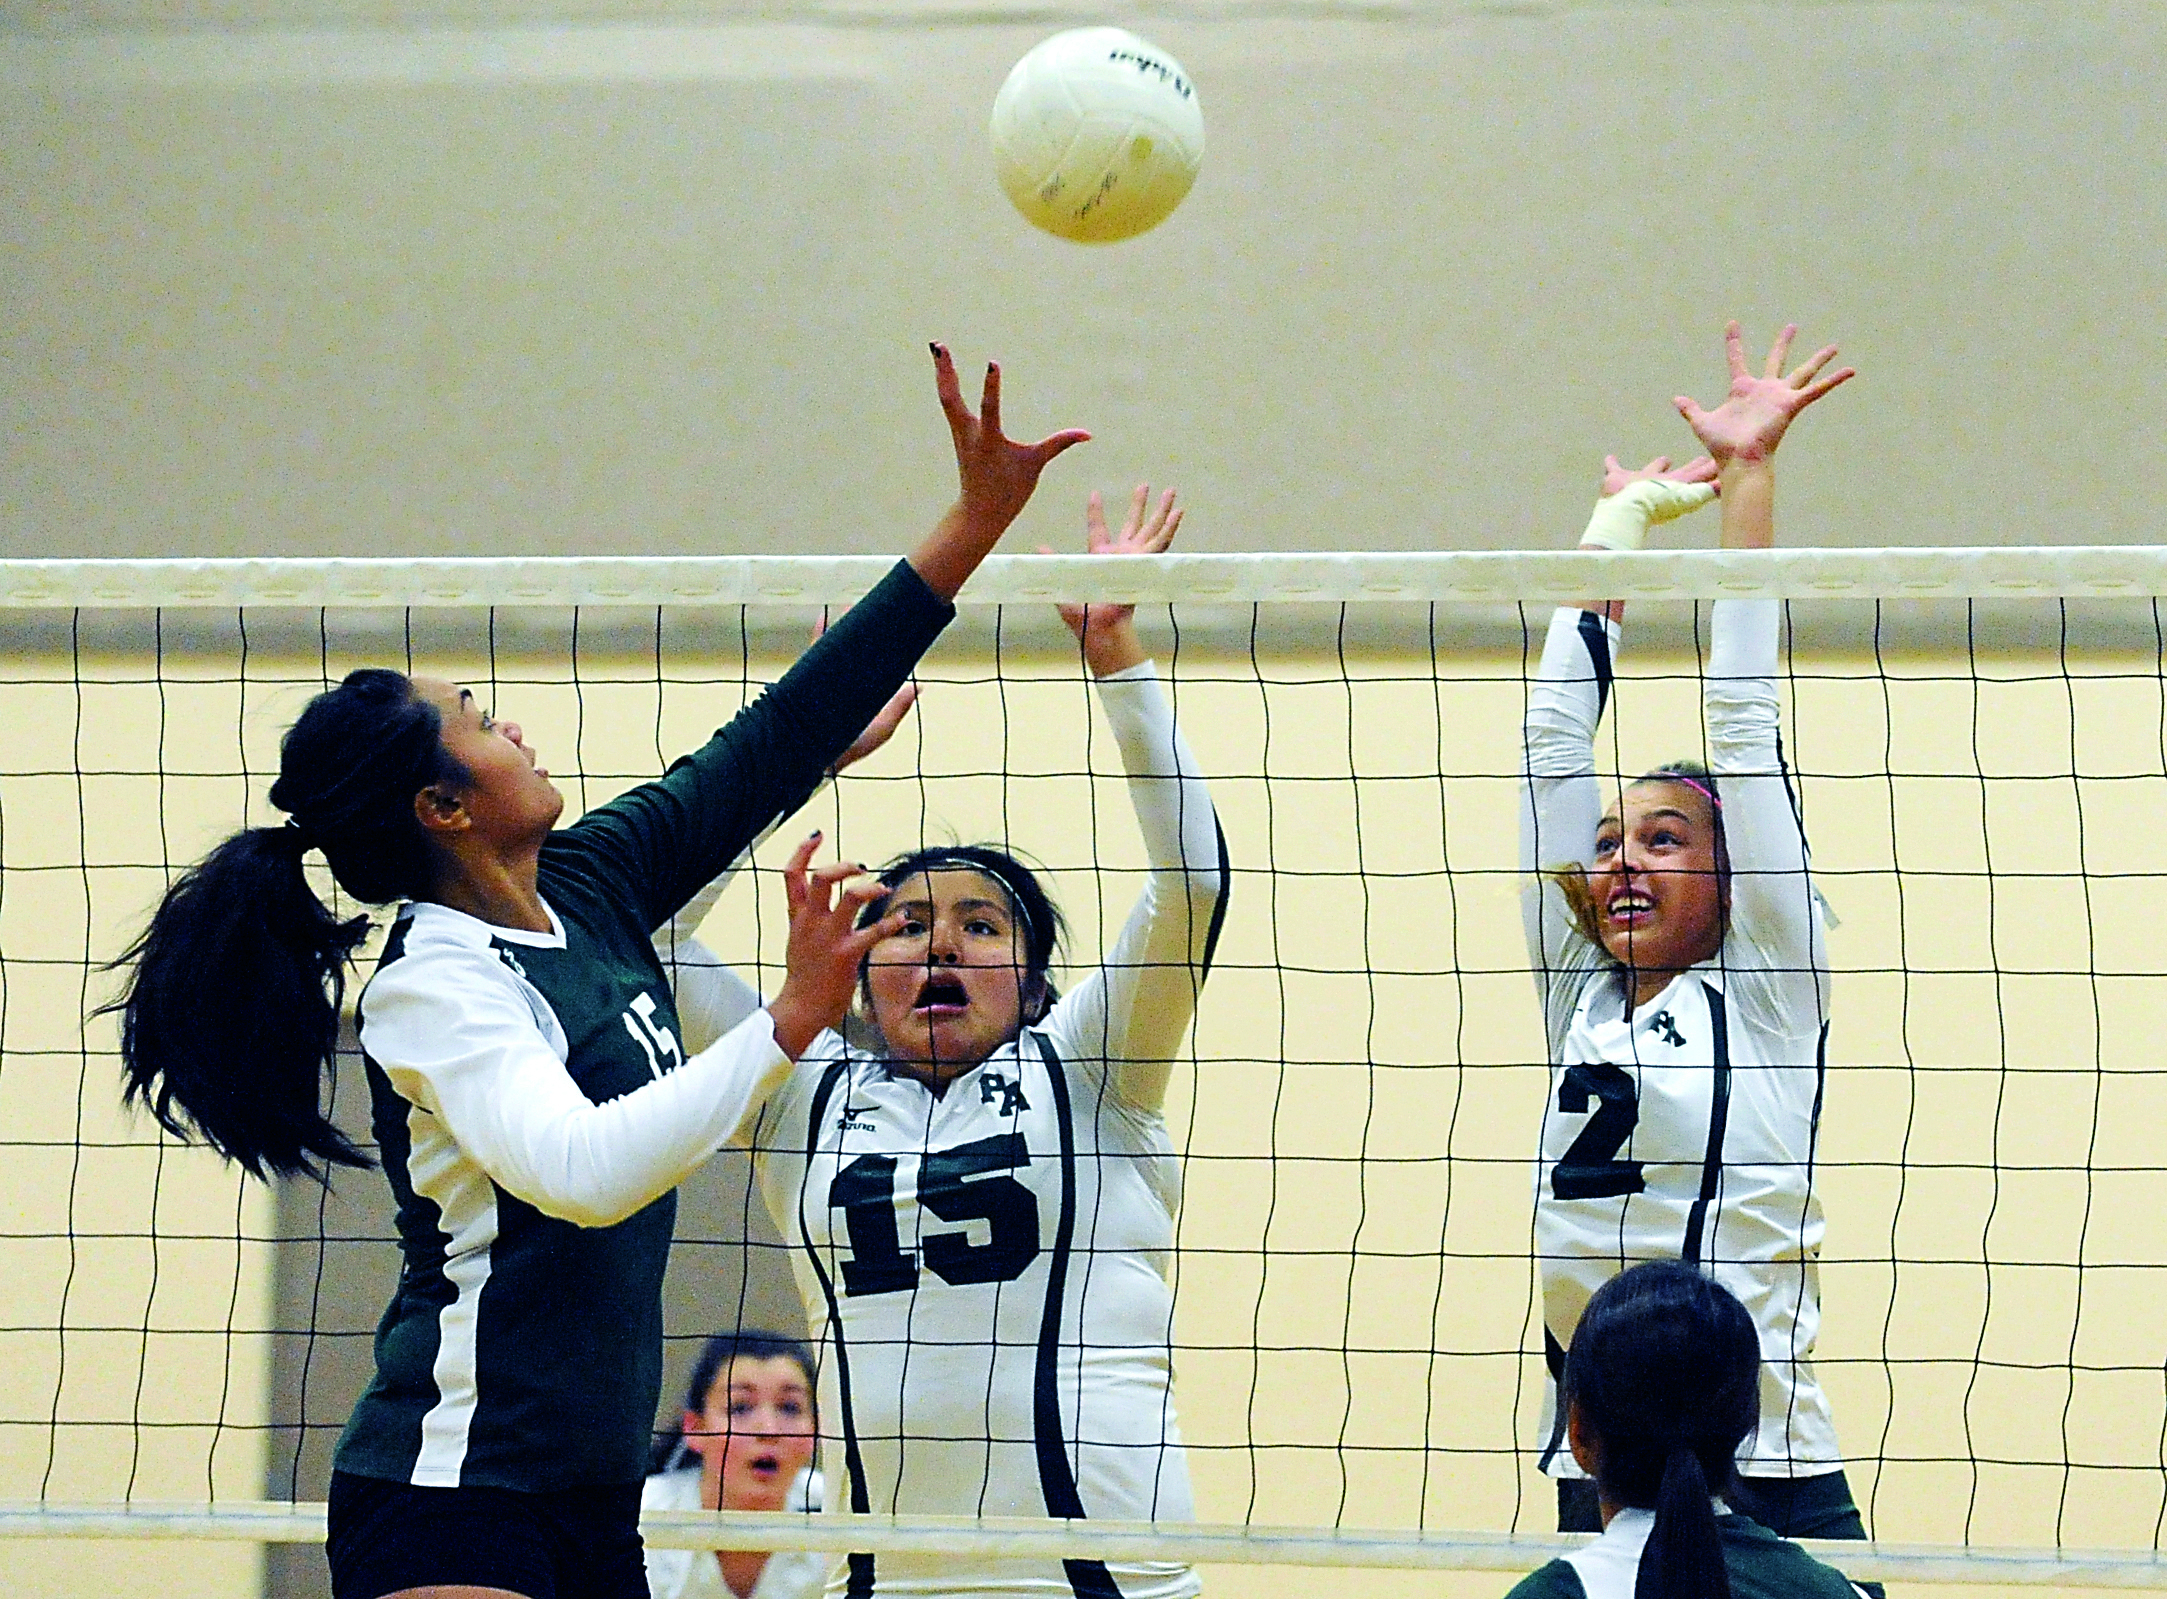 Port Angeles' Nizhoni Wheeler (15) and Maddy Hinrichs (2) attempt to block a hit by Evergreen's Mailelei Faletogo (15). The Riders defeated Evergreen 3-2. Lonnie Archibald/for Peninsula Daily News